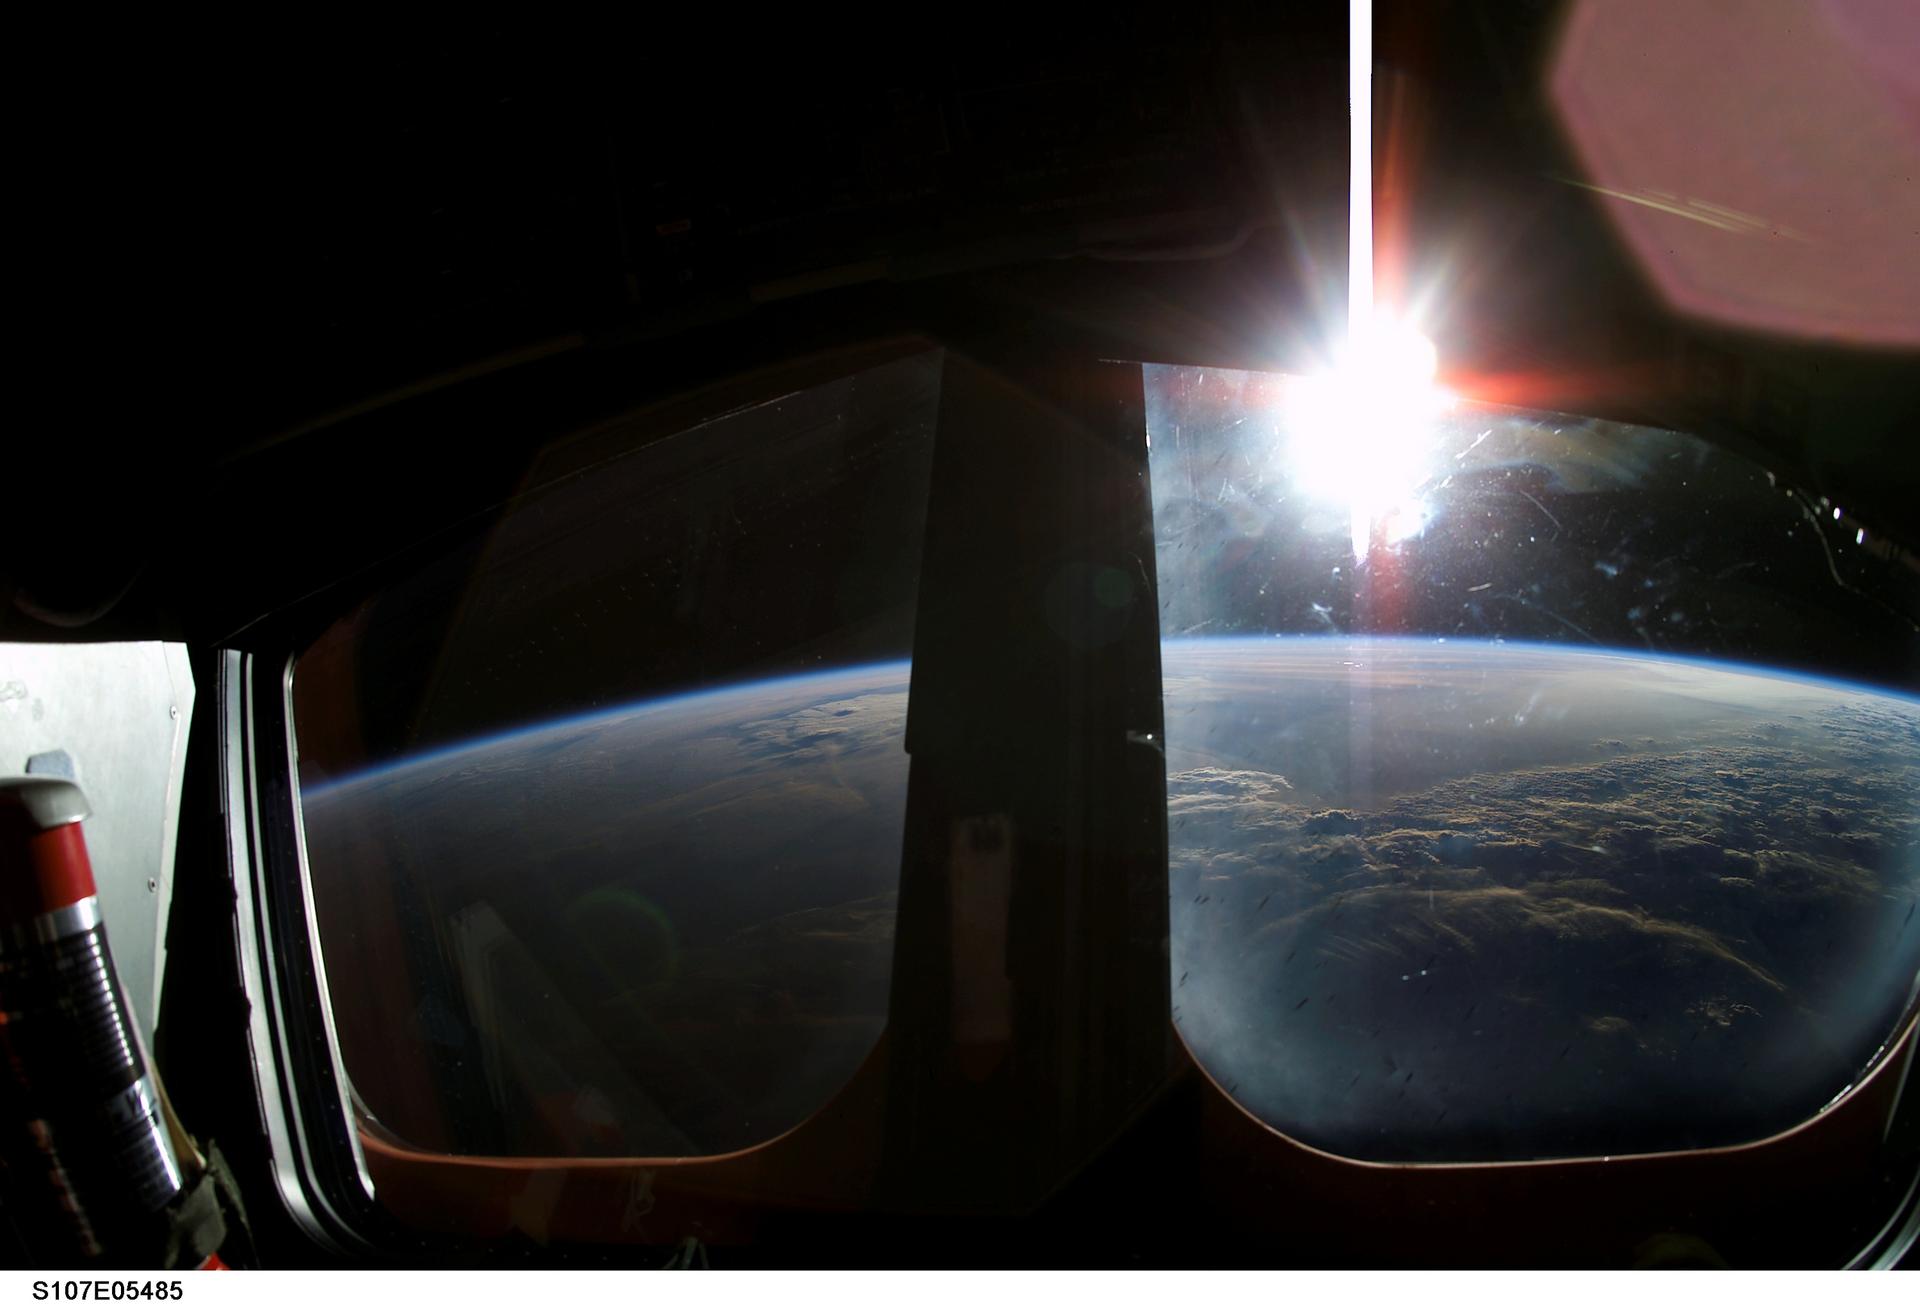 Sunrise seen from the crew cabin on STS-107